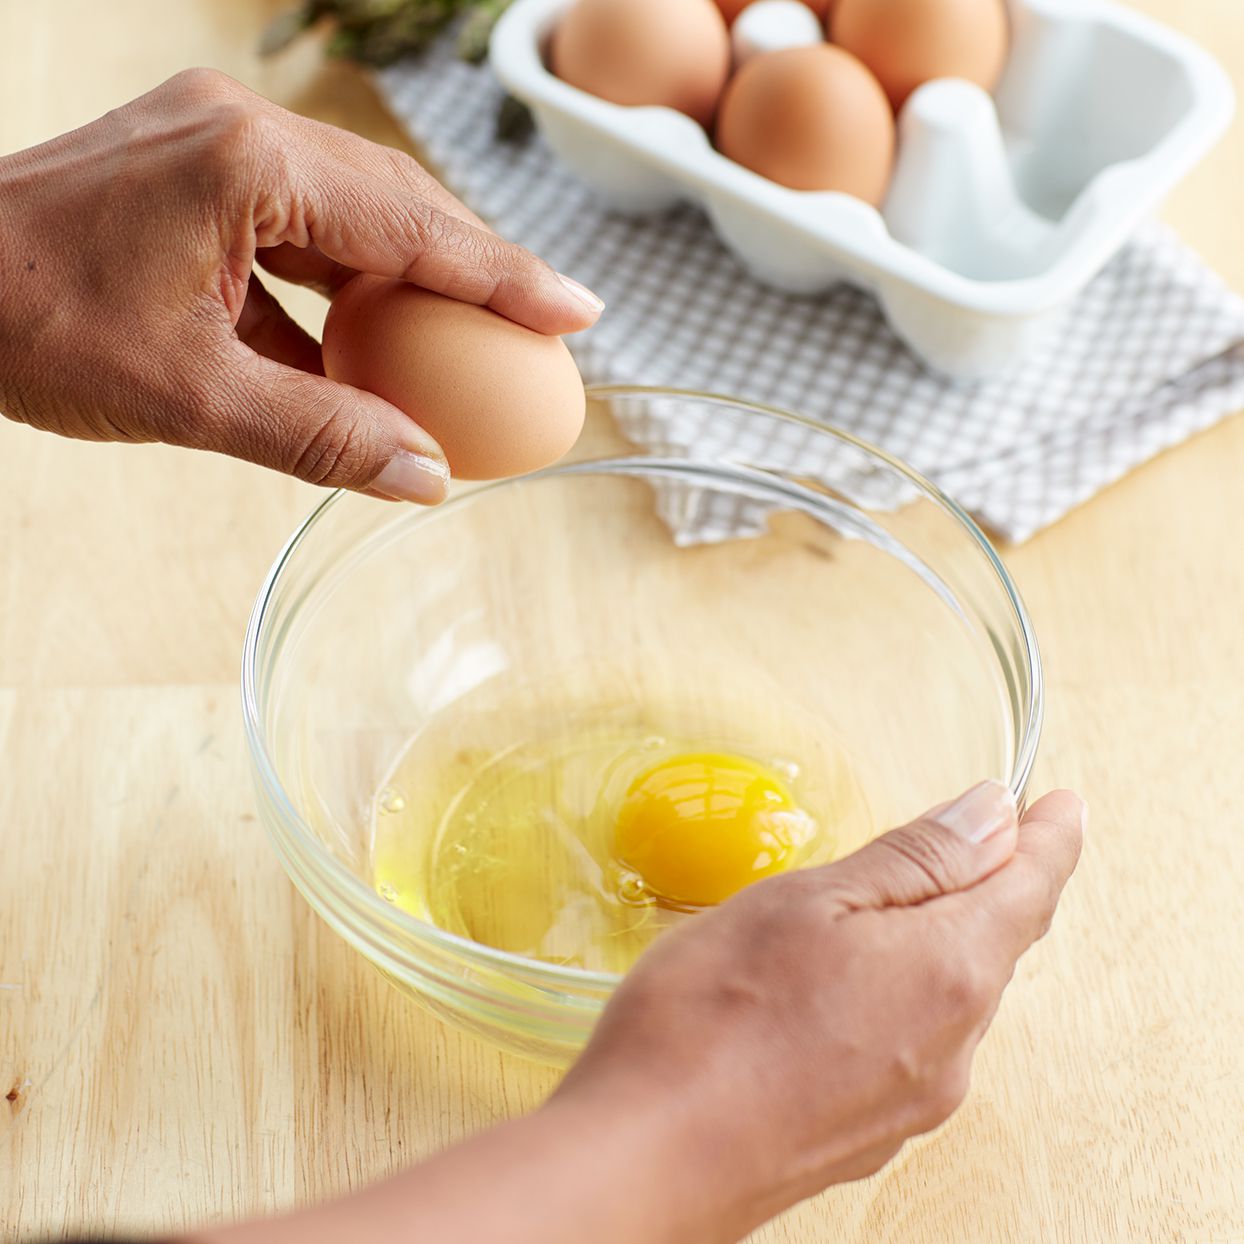 Hand cracking an egg on the side of the bowl